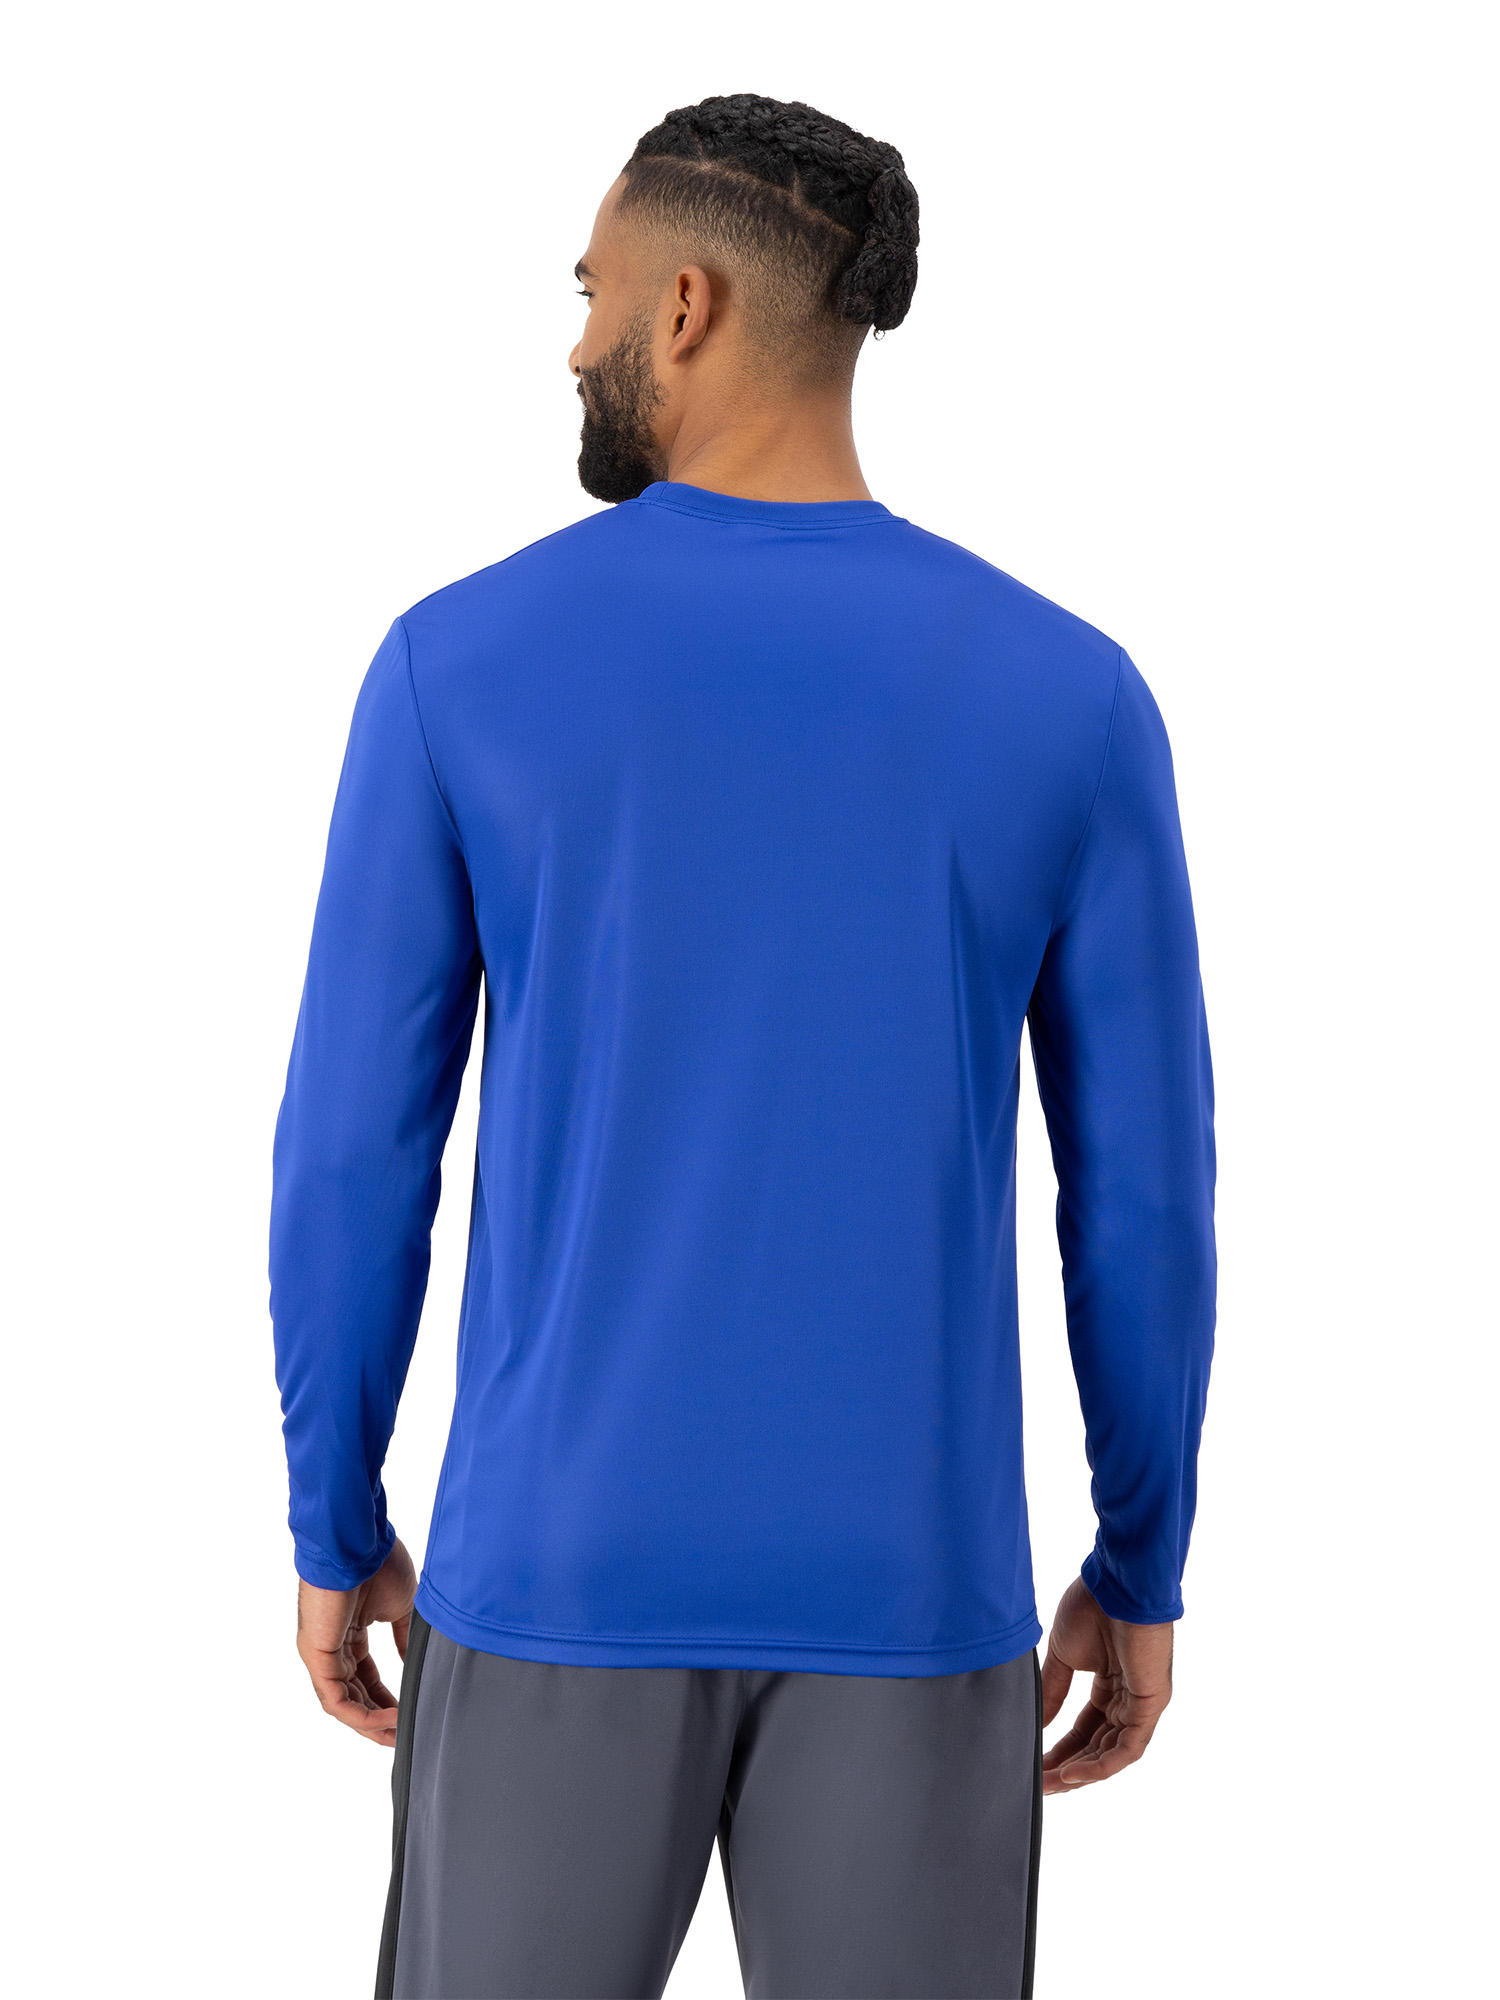 Hanes Men's and Big Men's Cool Dri Performance Long Sleeve T-Shirt (40+ UPF), Up to Size 3XL - image 3 of 8